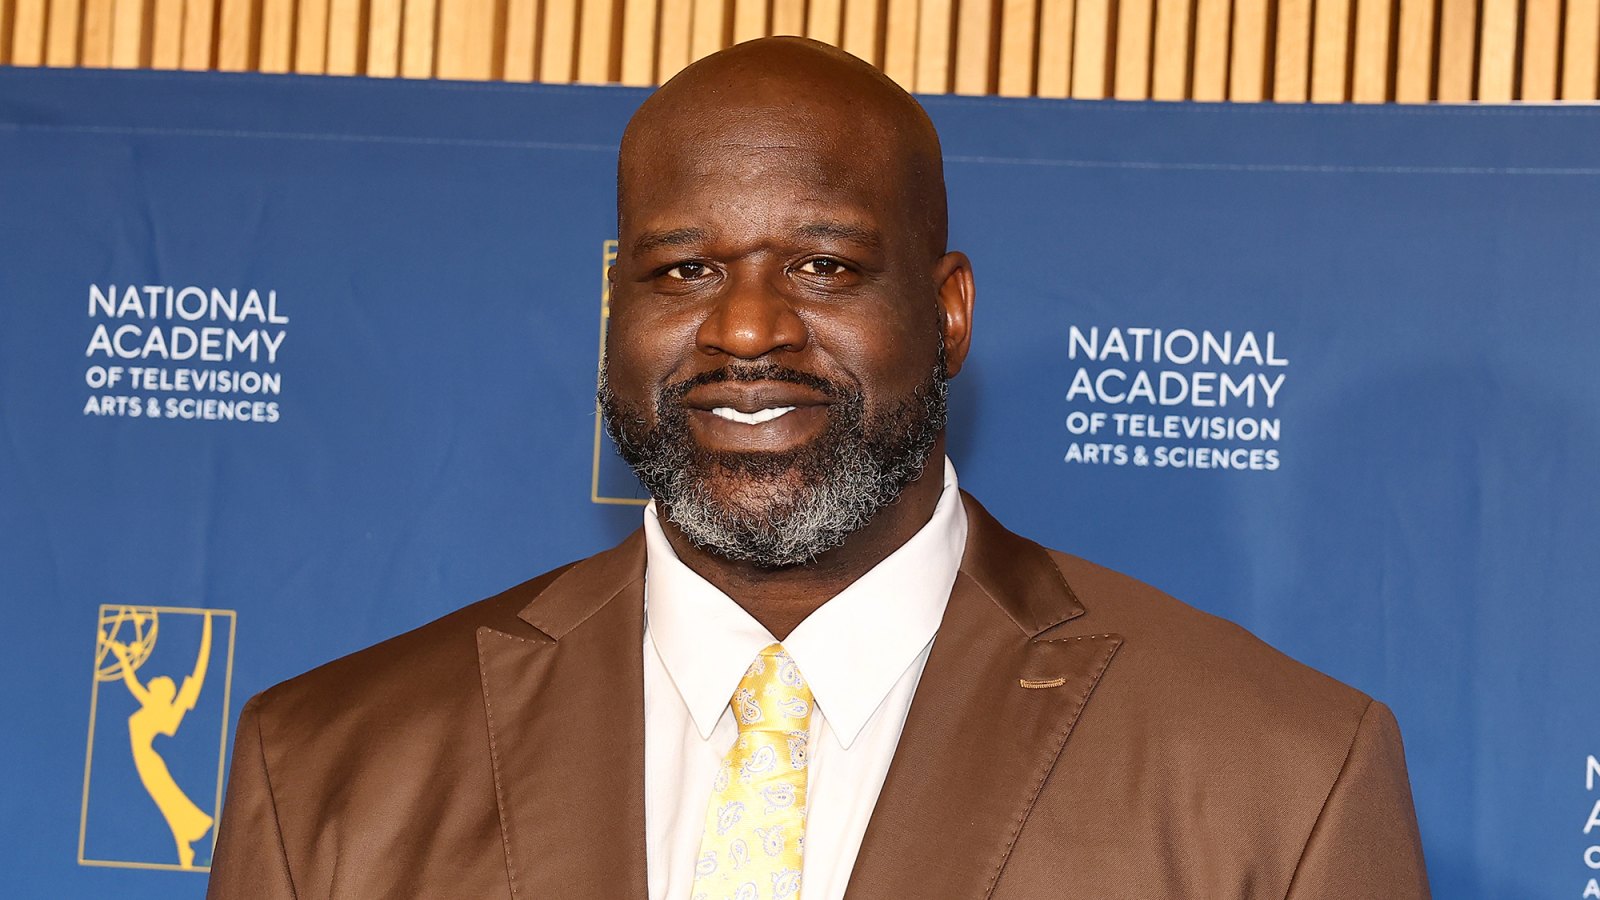 Shaquille O’Neal Says He ‘Couldn’t Walk Up the Stairs’ Before Dropping 55 Lbs, Reveals Goal Weight